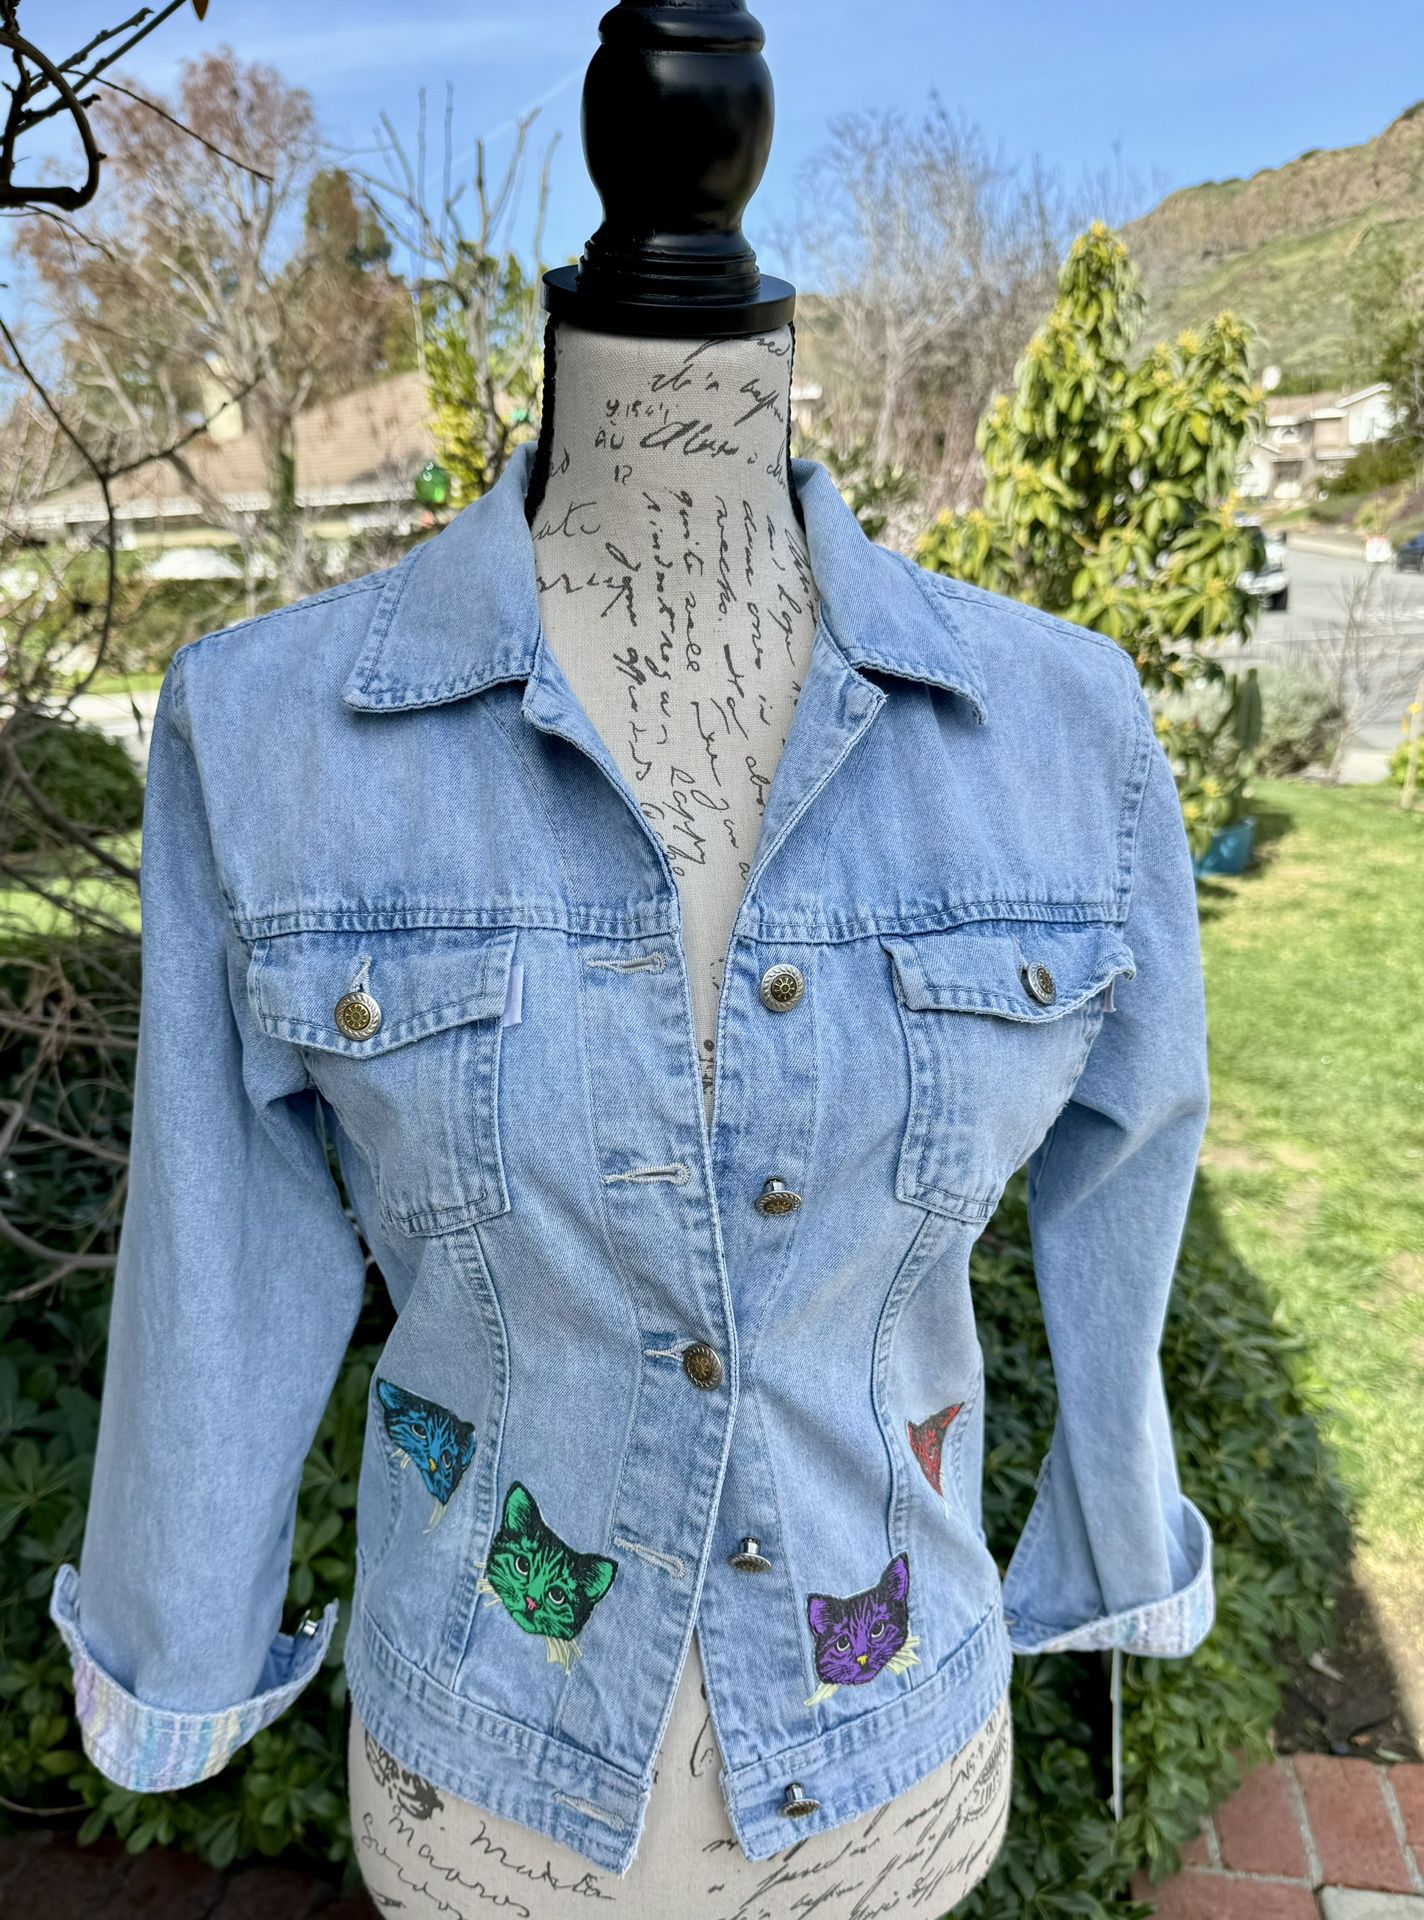  Women’s Denim Jacket Petite with Colorful Kitties and Multi Colored Cuffs